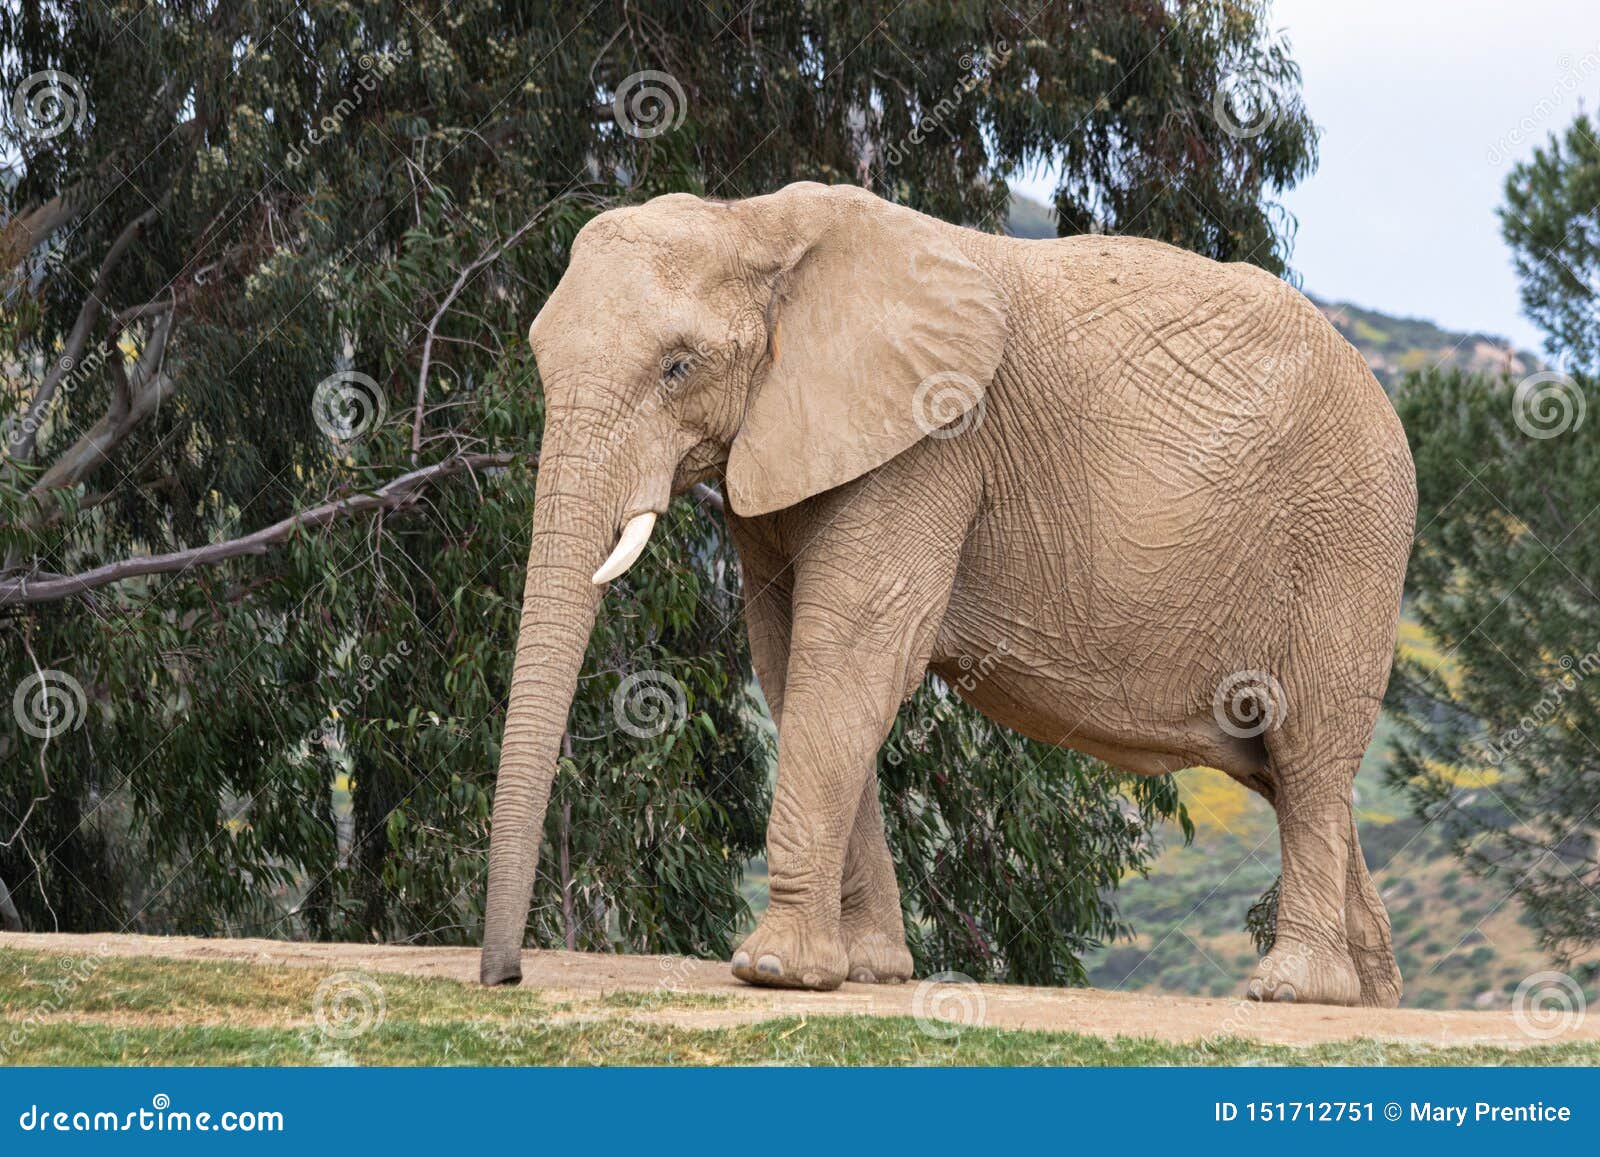 African Elephant, Female Walking, Trees in Background, Large Ears, Calm  Peaceful Powerful Animal Editorial Photo - Image of nature, daytime:  151712751